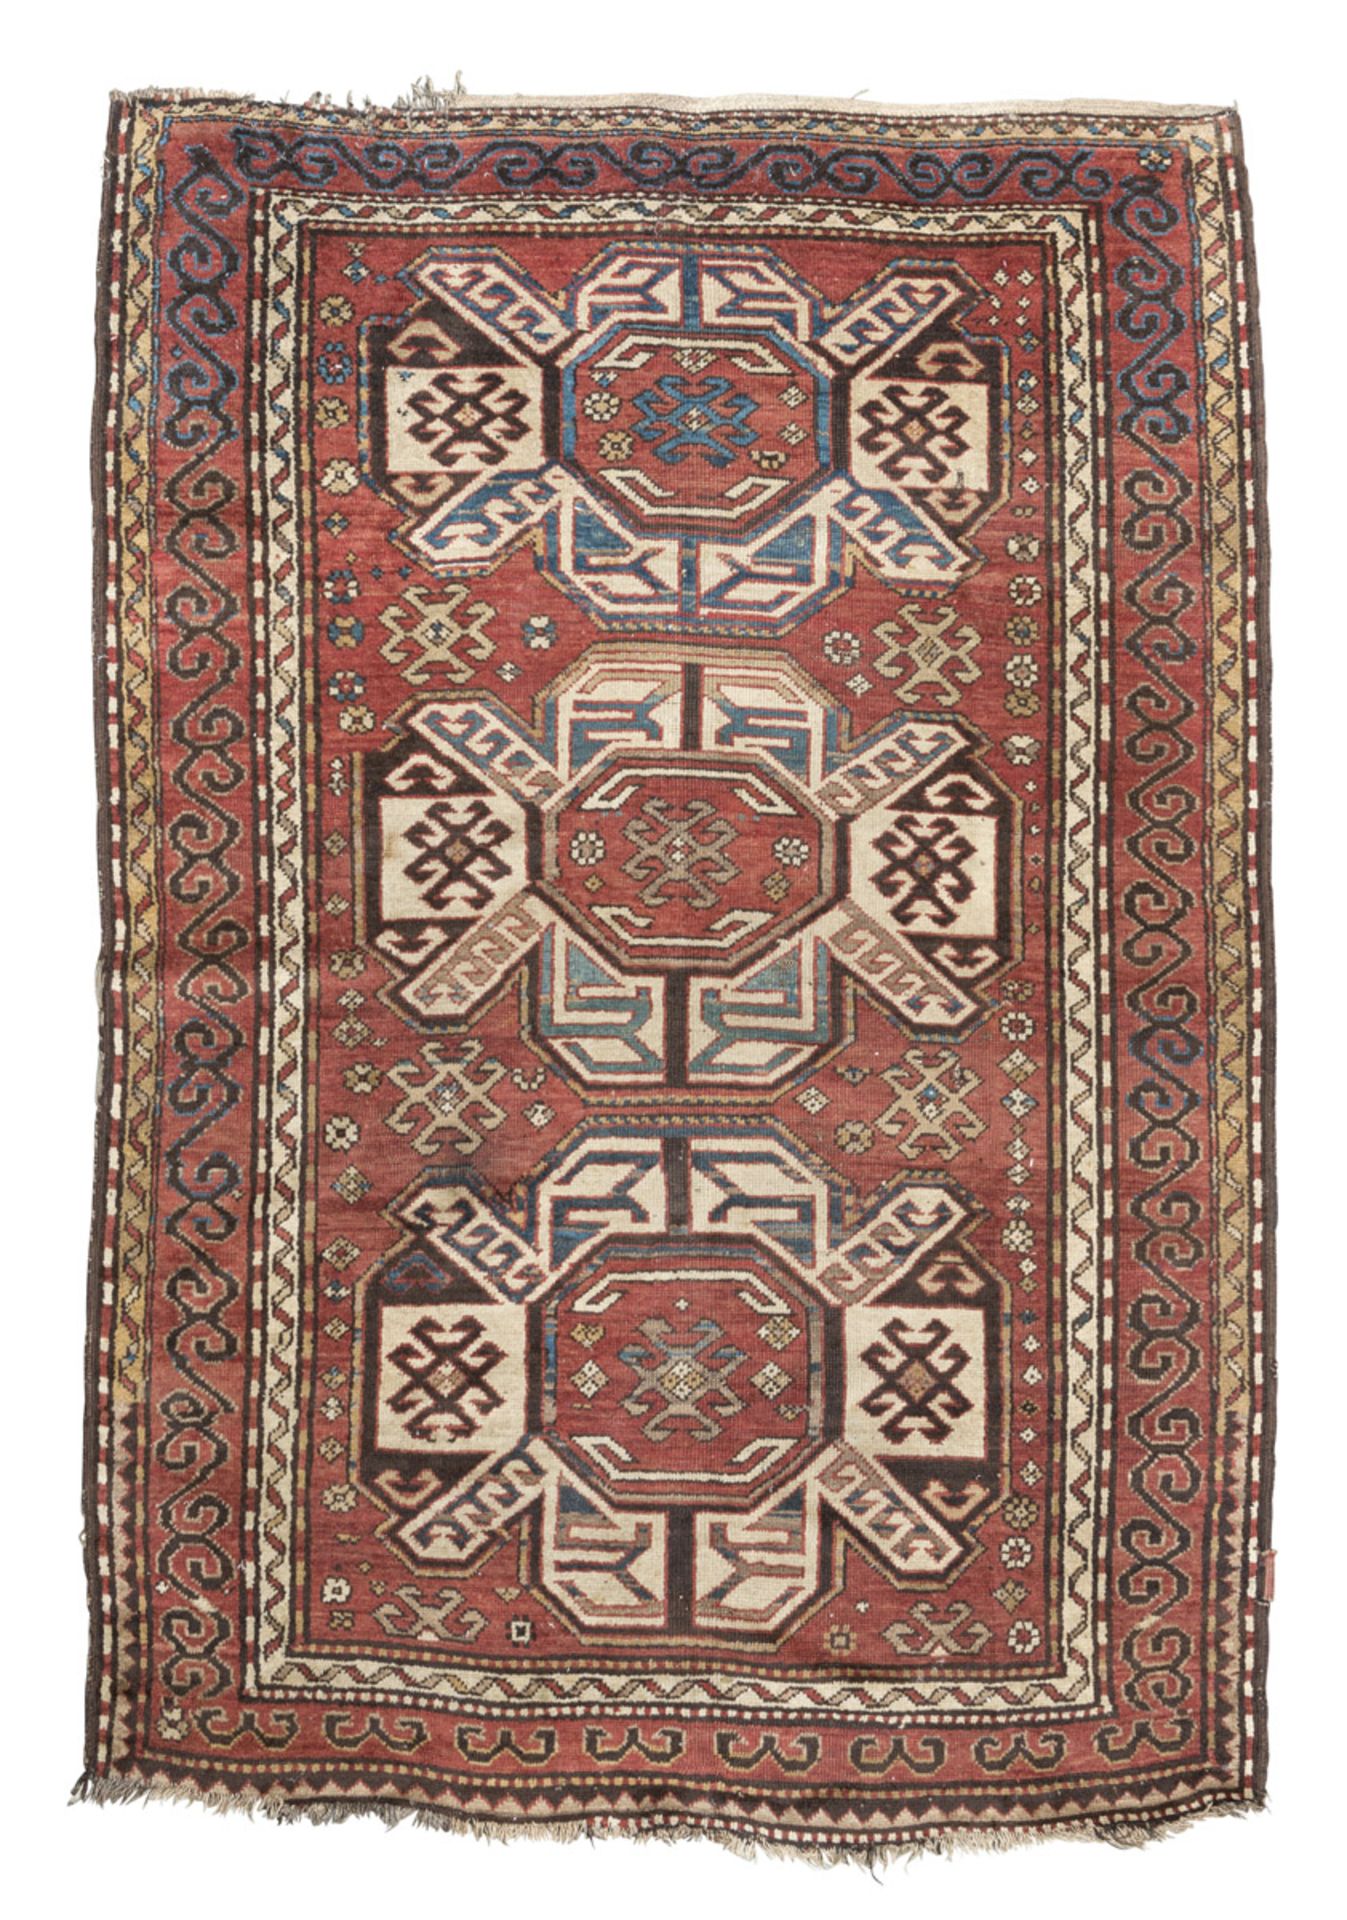 KARABAGH CARPET, LATE 19TH CENTURY gul design with animals and secondary motifs of rhombuses with